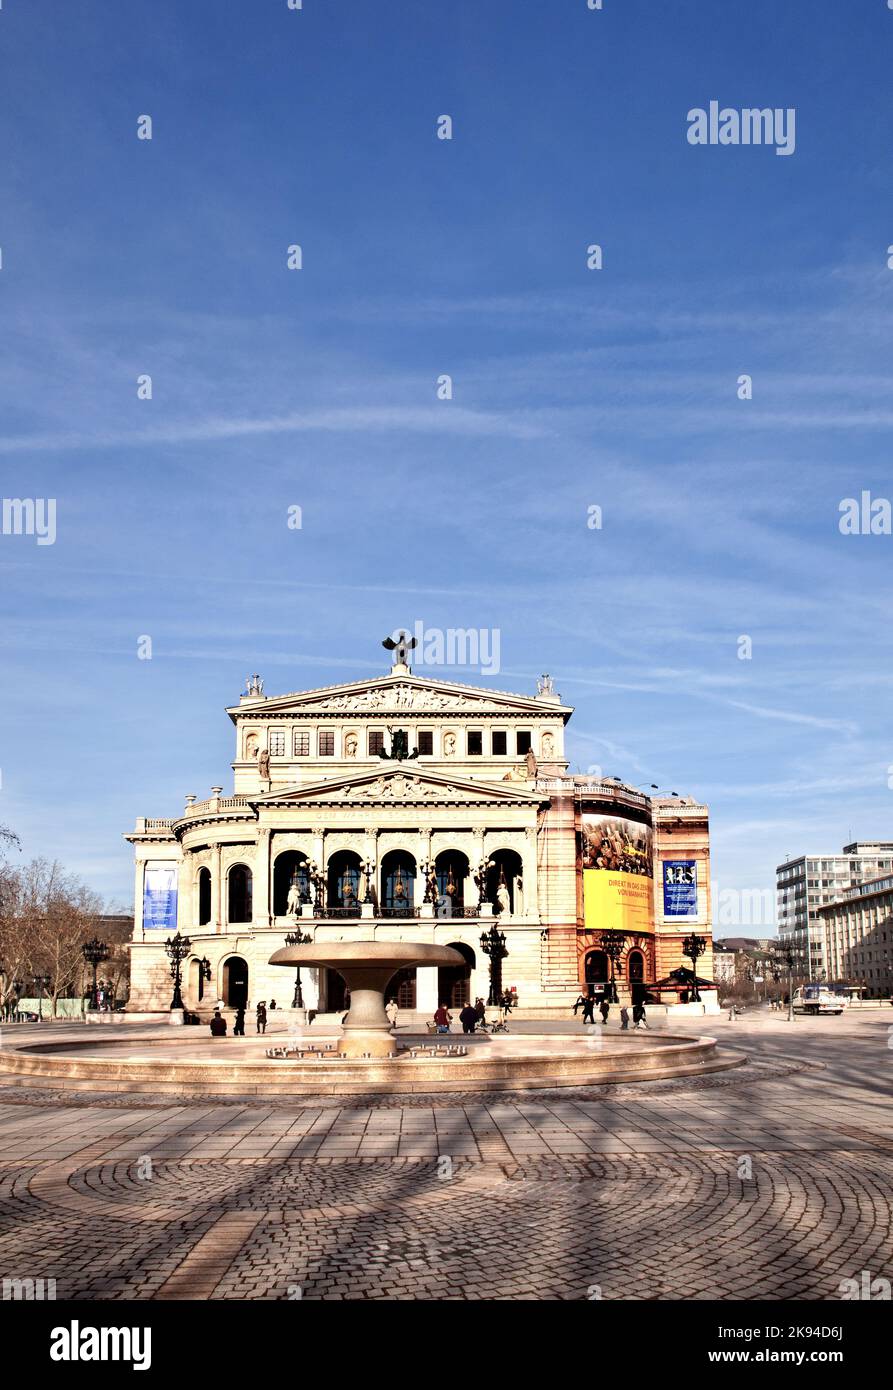 FRANKFURT, GERMANY - FEB 9, 2011: the Old opera house in Frankfurt, Germany. Alte Oper is a concert hall build in 1970s on the site of and resembling Stock Photo